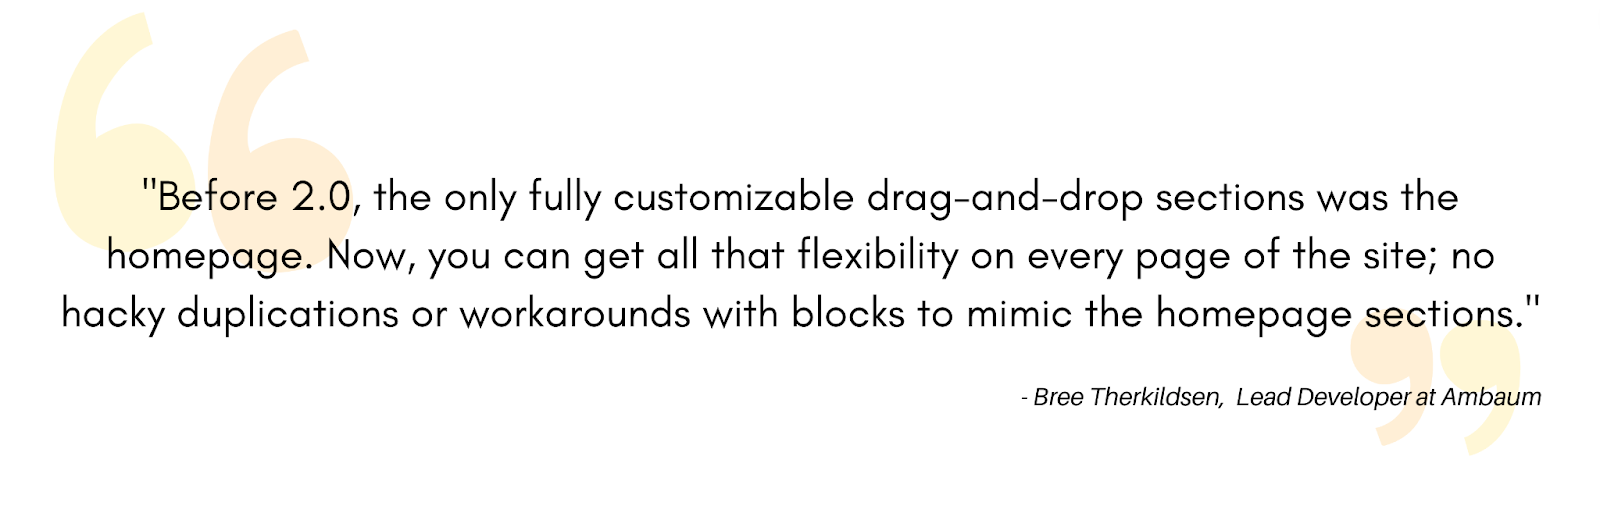 Before 2.0, the only fully customizable drag-and-drop sections was the homepage. Now, you can get  all that flexibility on every page of the site; no hacky duplications or workarounds with blocks to mimic the homepage sections. - Bree Therkildsen, Lead Developer at Ambaum